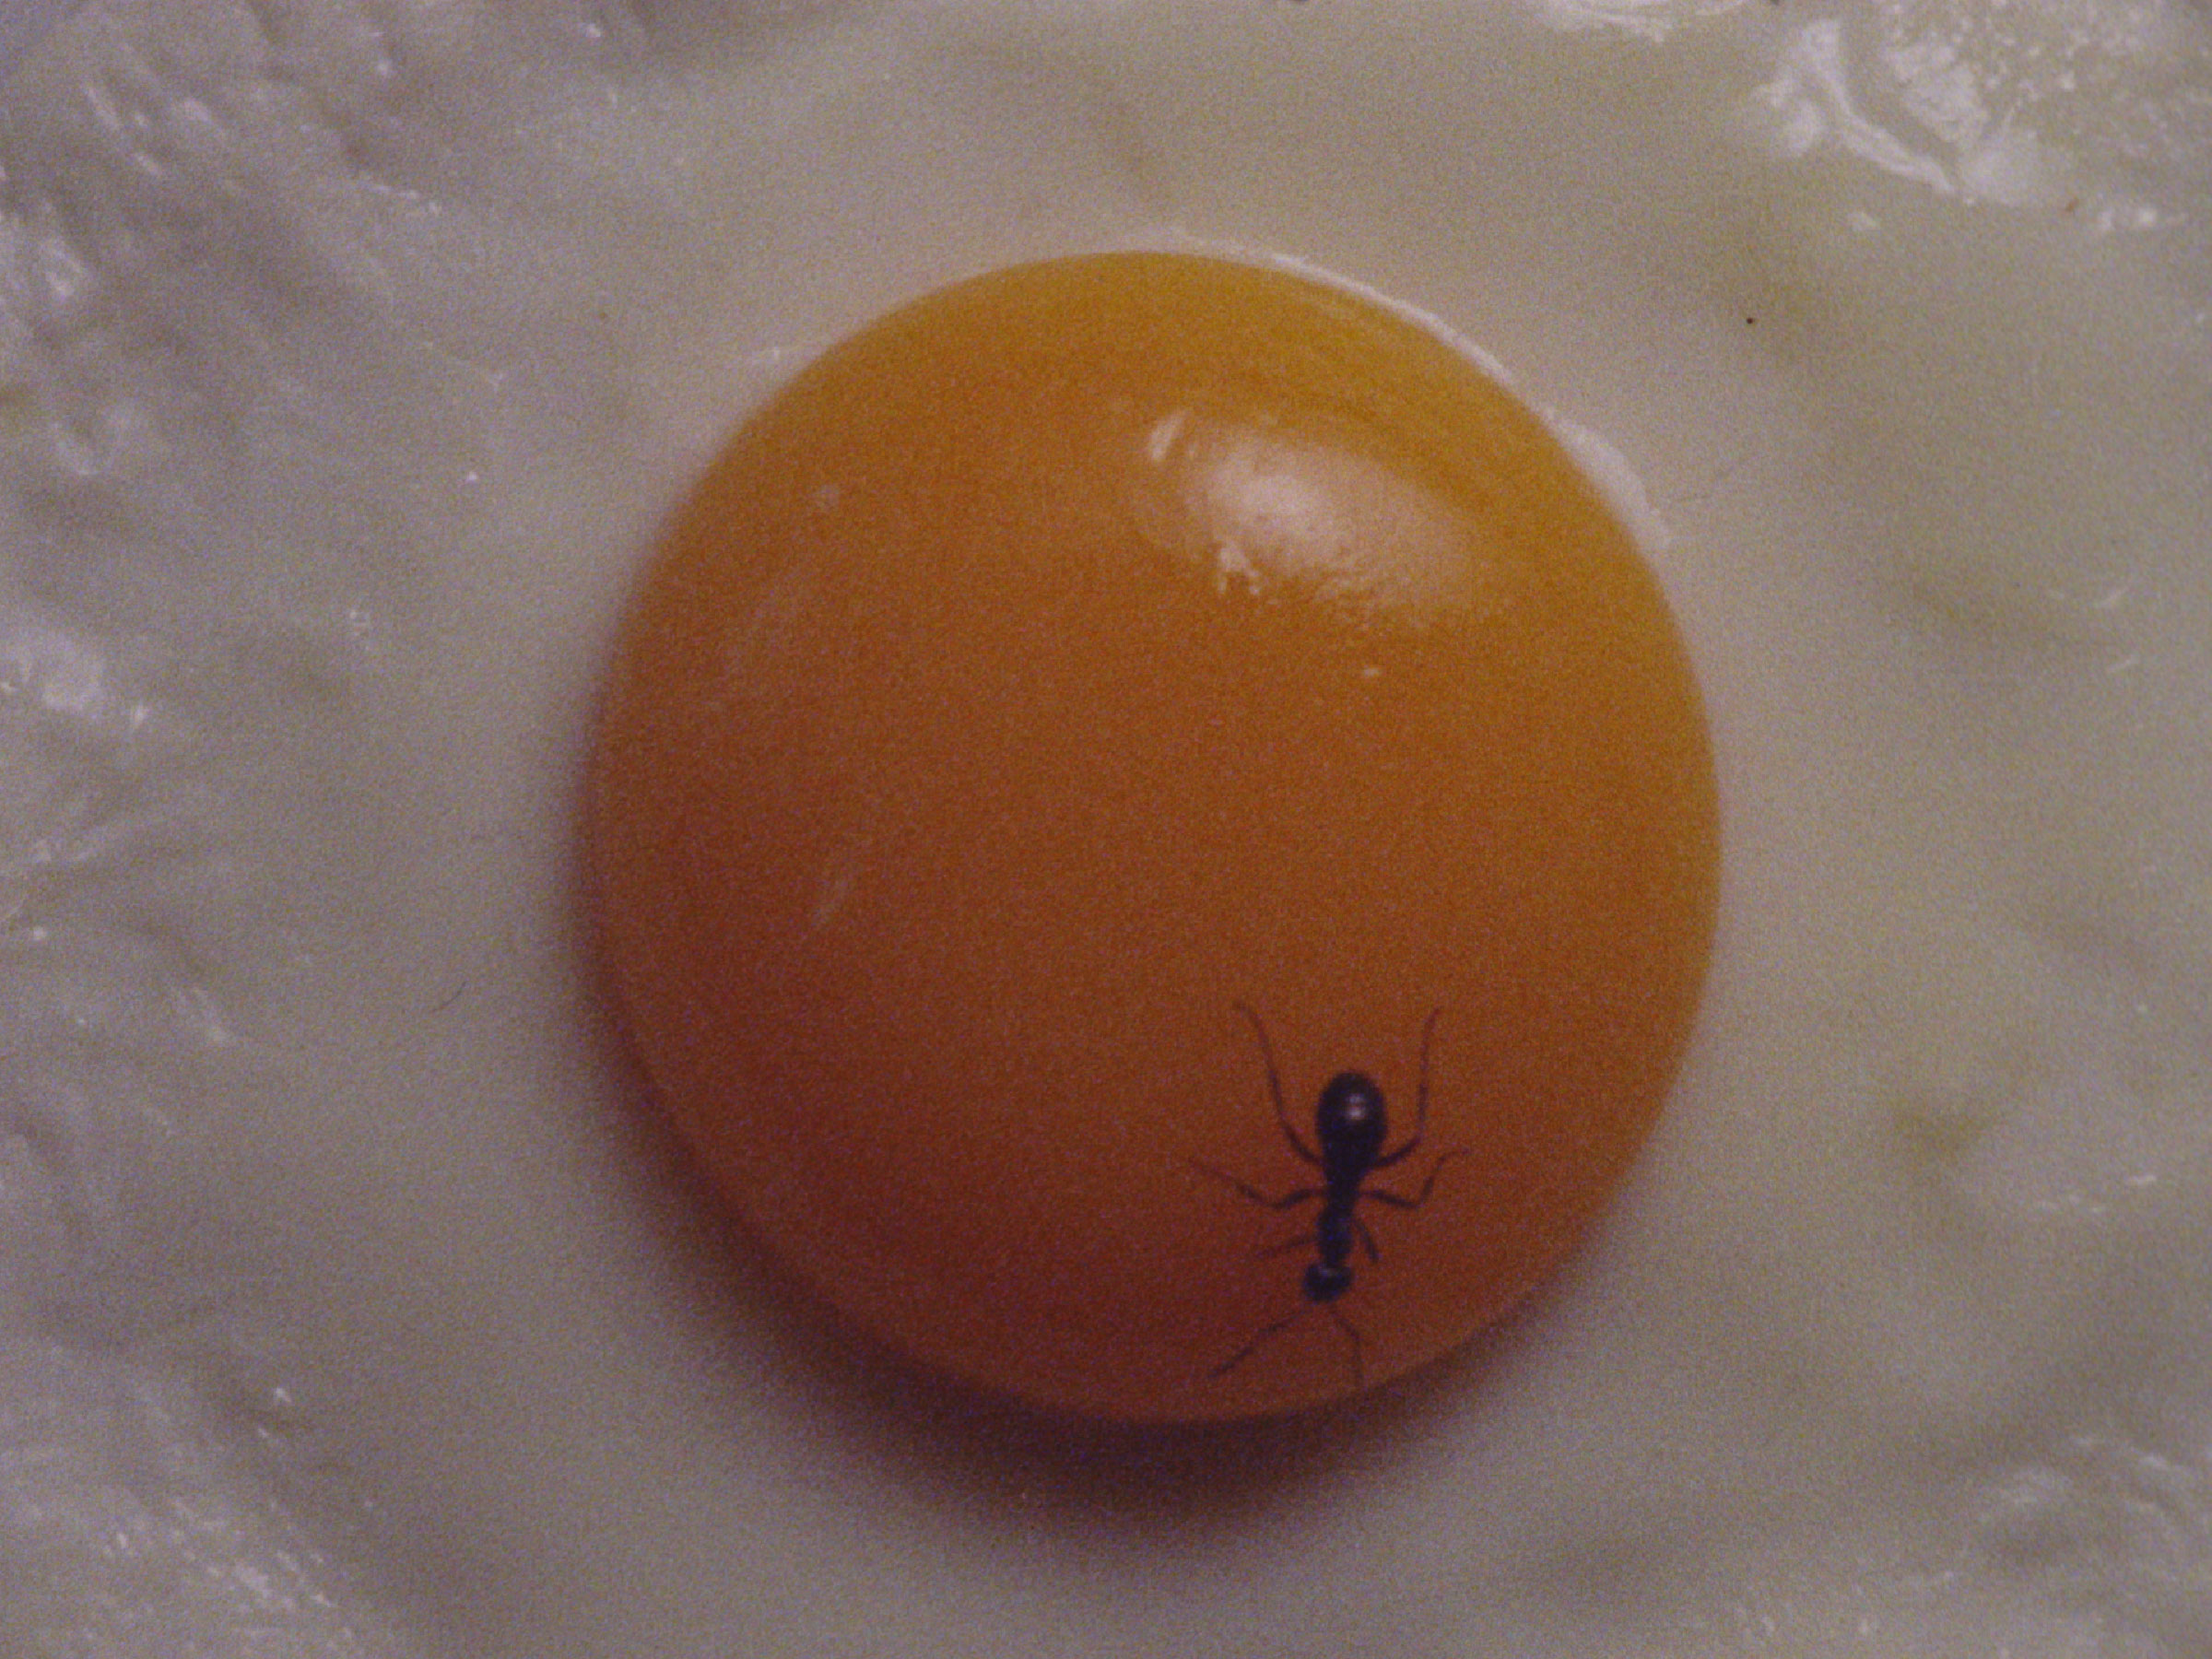 16mm film still: an ant on a fried egg